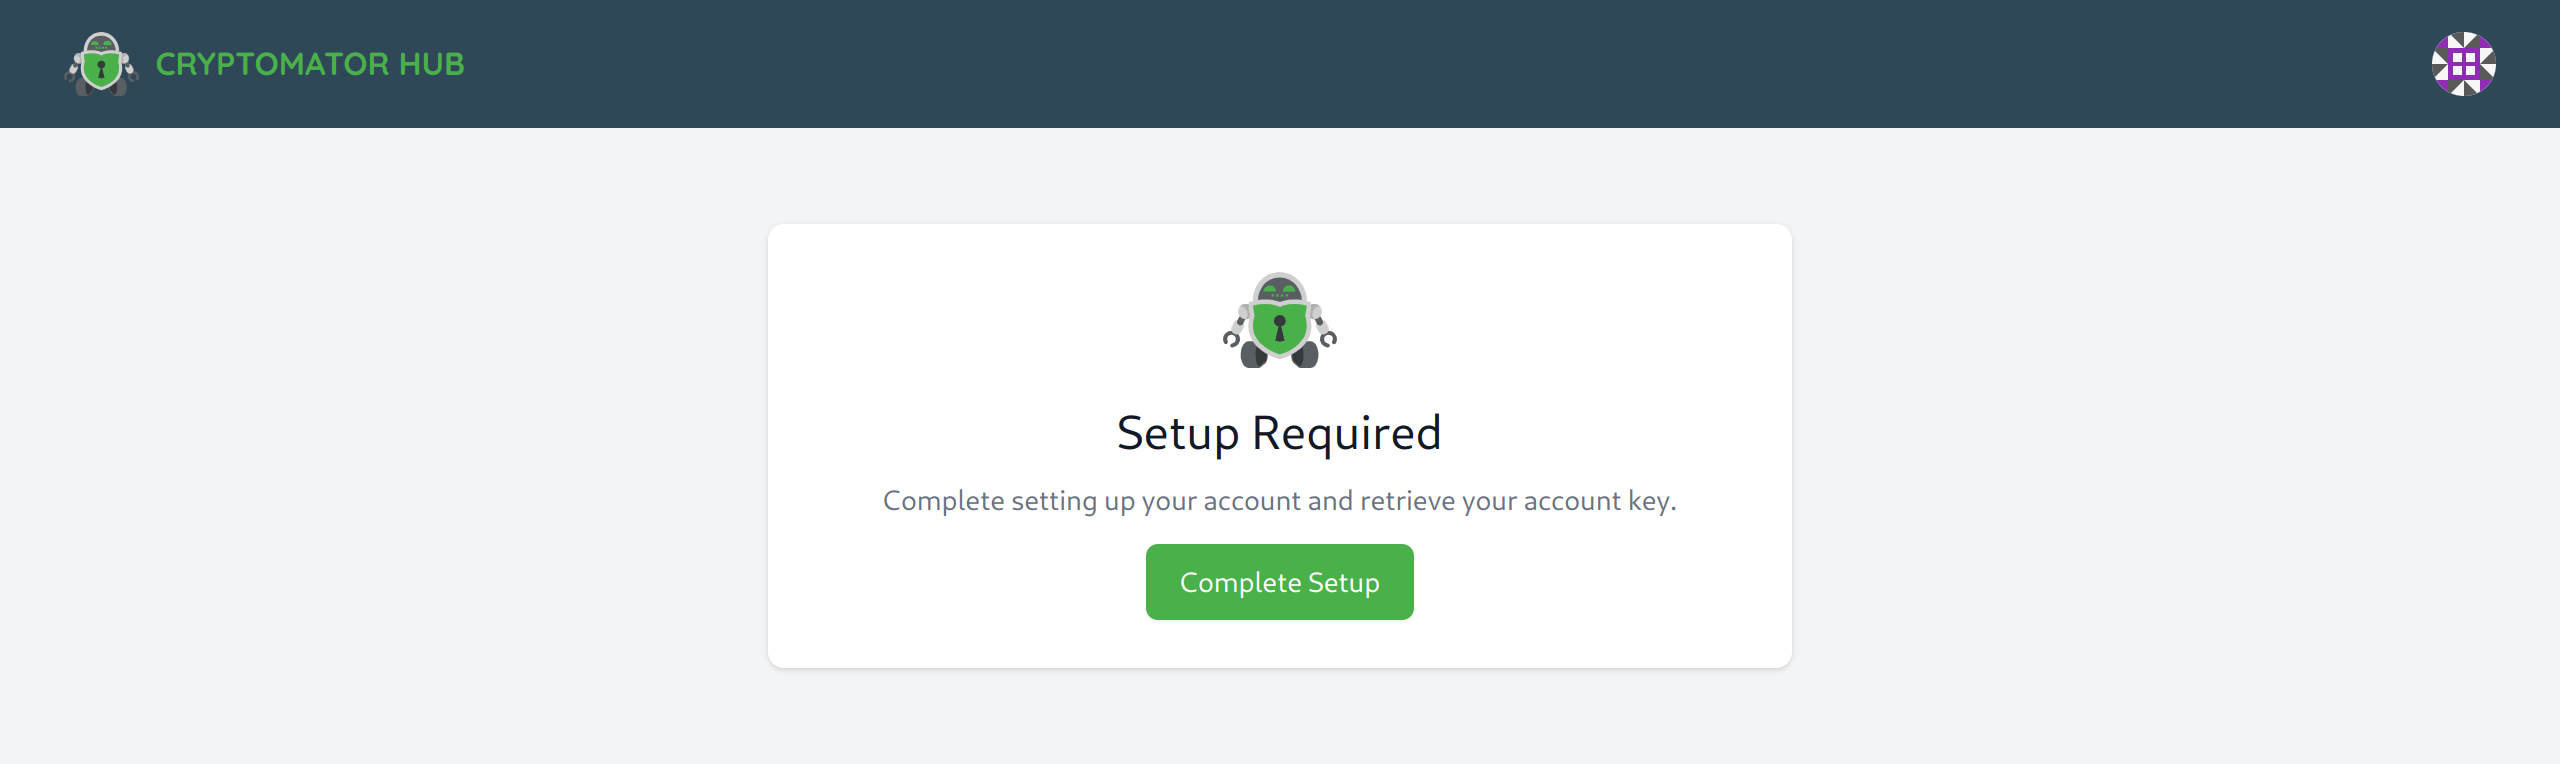 Hub requests to setup your user account